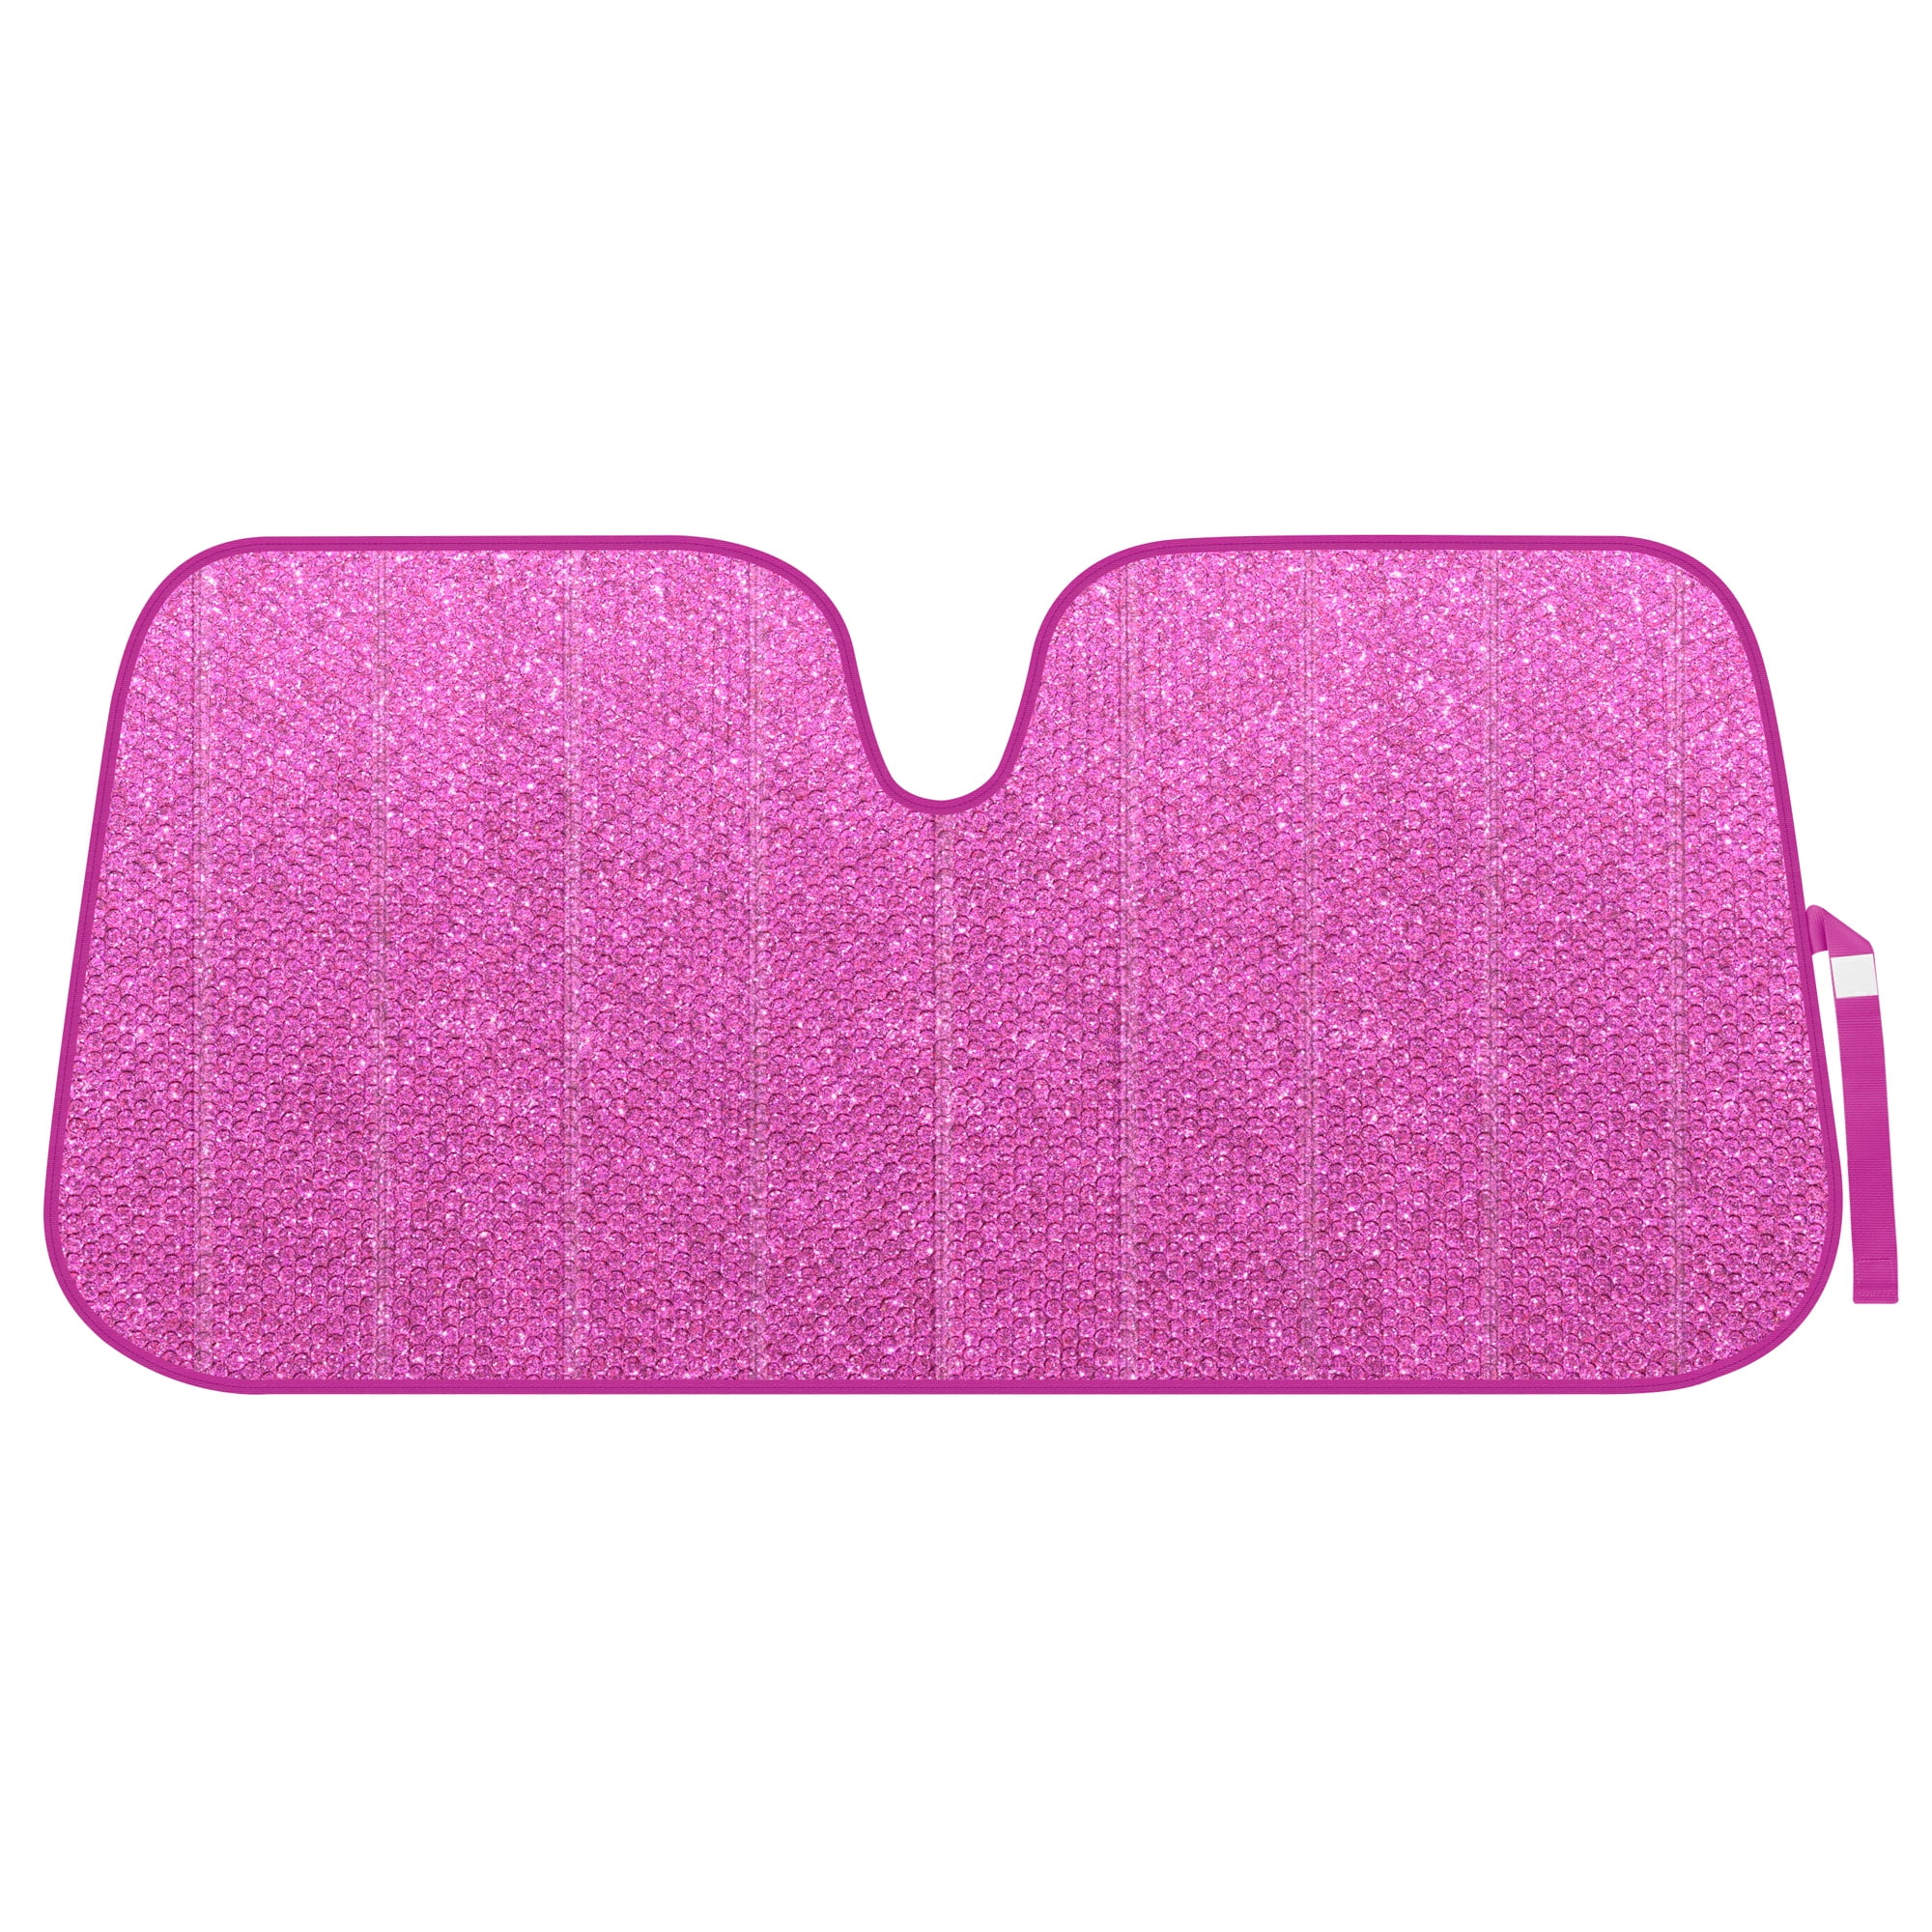 Pink Glitter Front Windshield Shade-Accordion Folding Auto Sunshade for Car  Truck SUV-Blocks UV Rays Sun Visor Protector-Keeps Your Vehicle Cool-58 x 